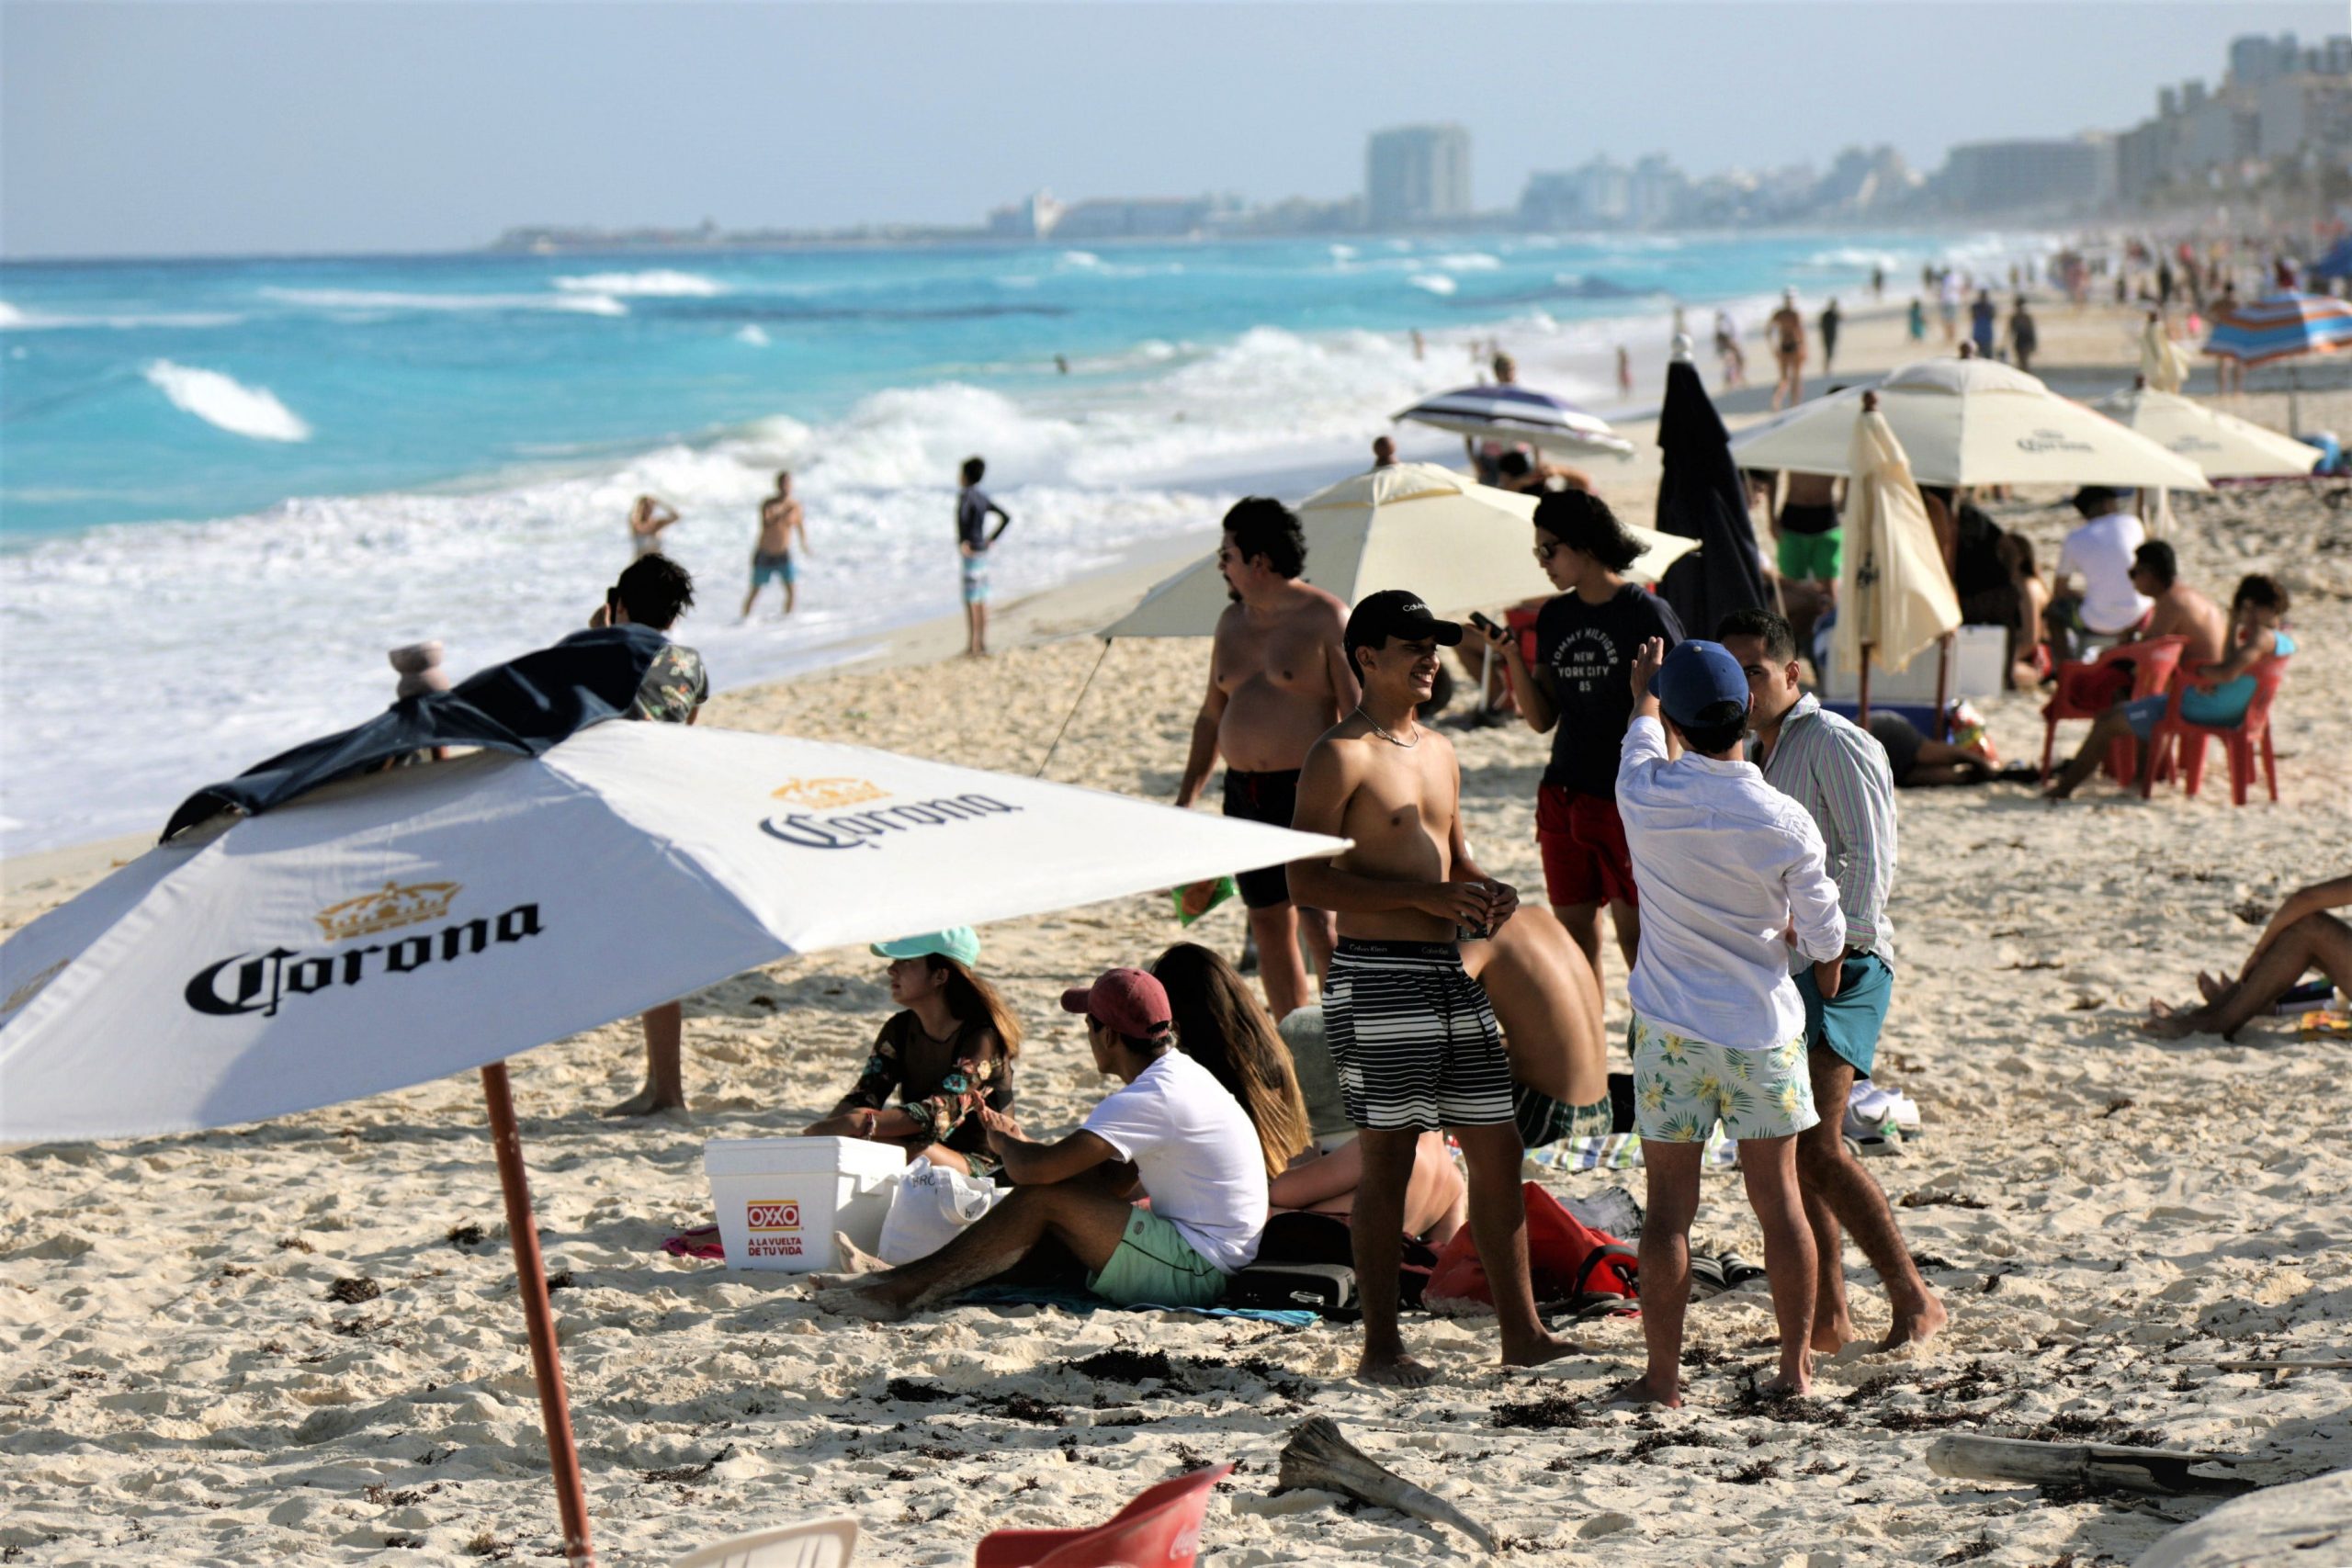 Cancun taxi drivers throw wrench in spring break plans as Americans flock to Mexican destination